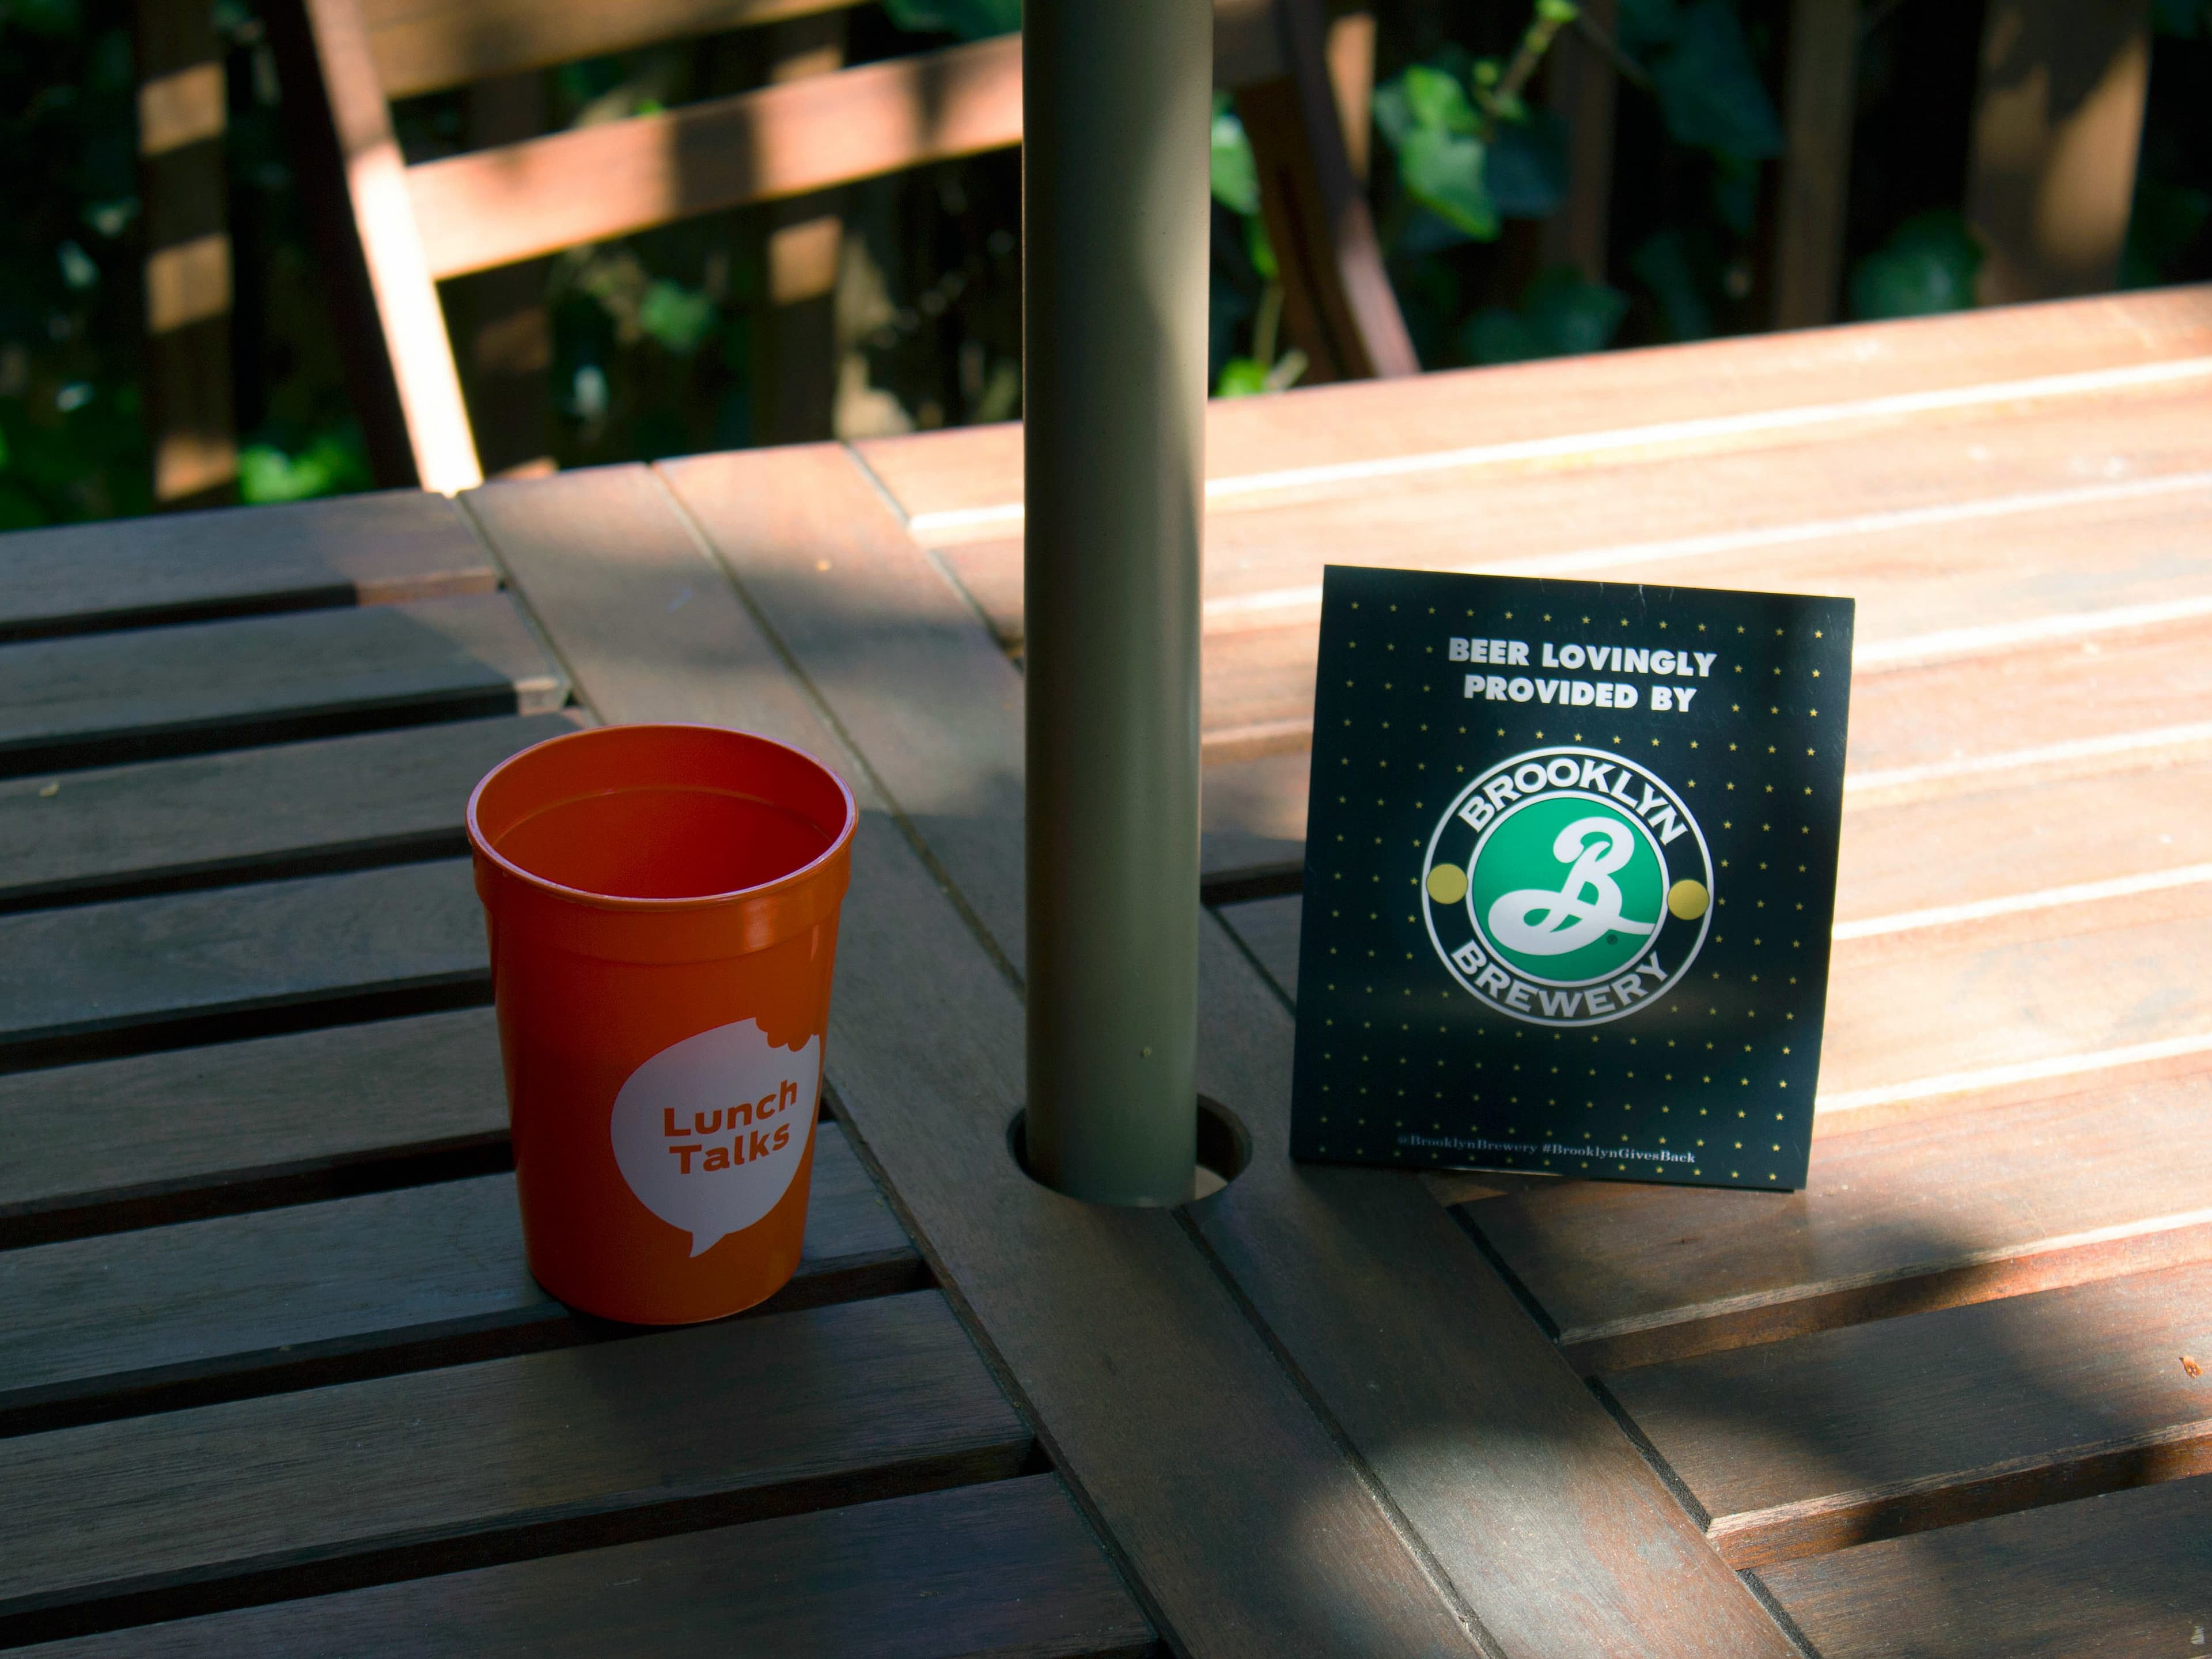 A wooden outdoor table with an orange cup labeled "Lunch Talks" and a sign featuring the Brooklyn Brewery logo. Sunlight and shadows cover the table, creating a calm, inviting atmosphere.